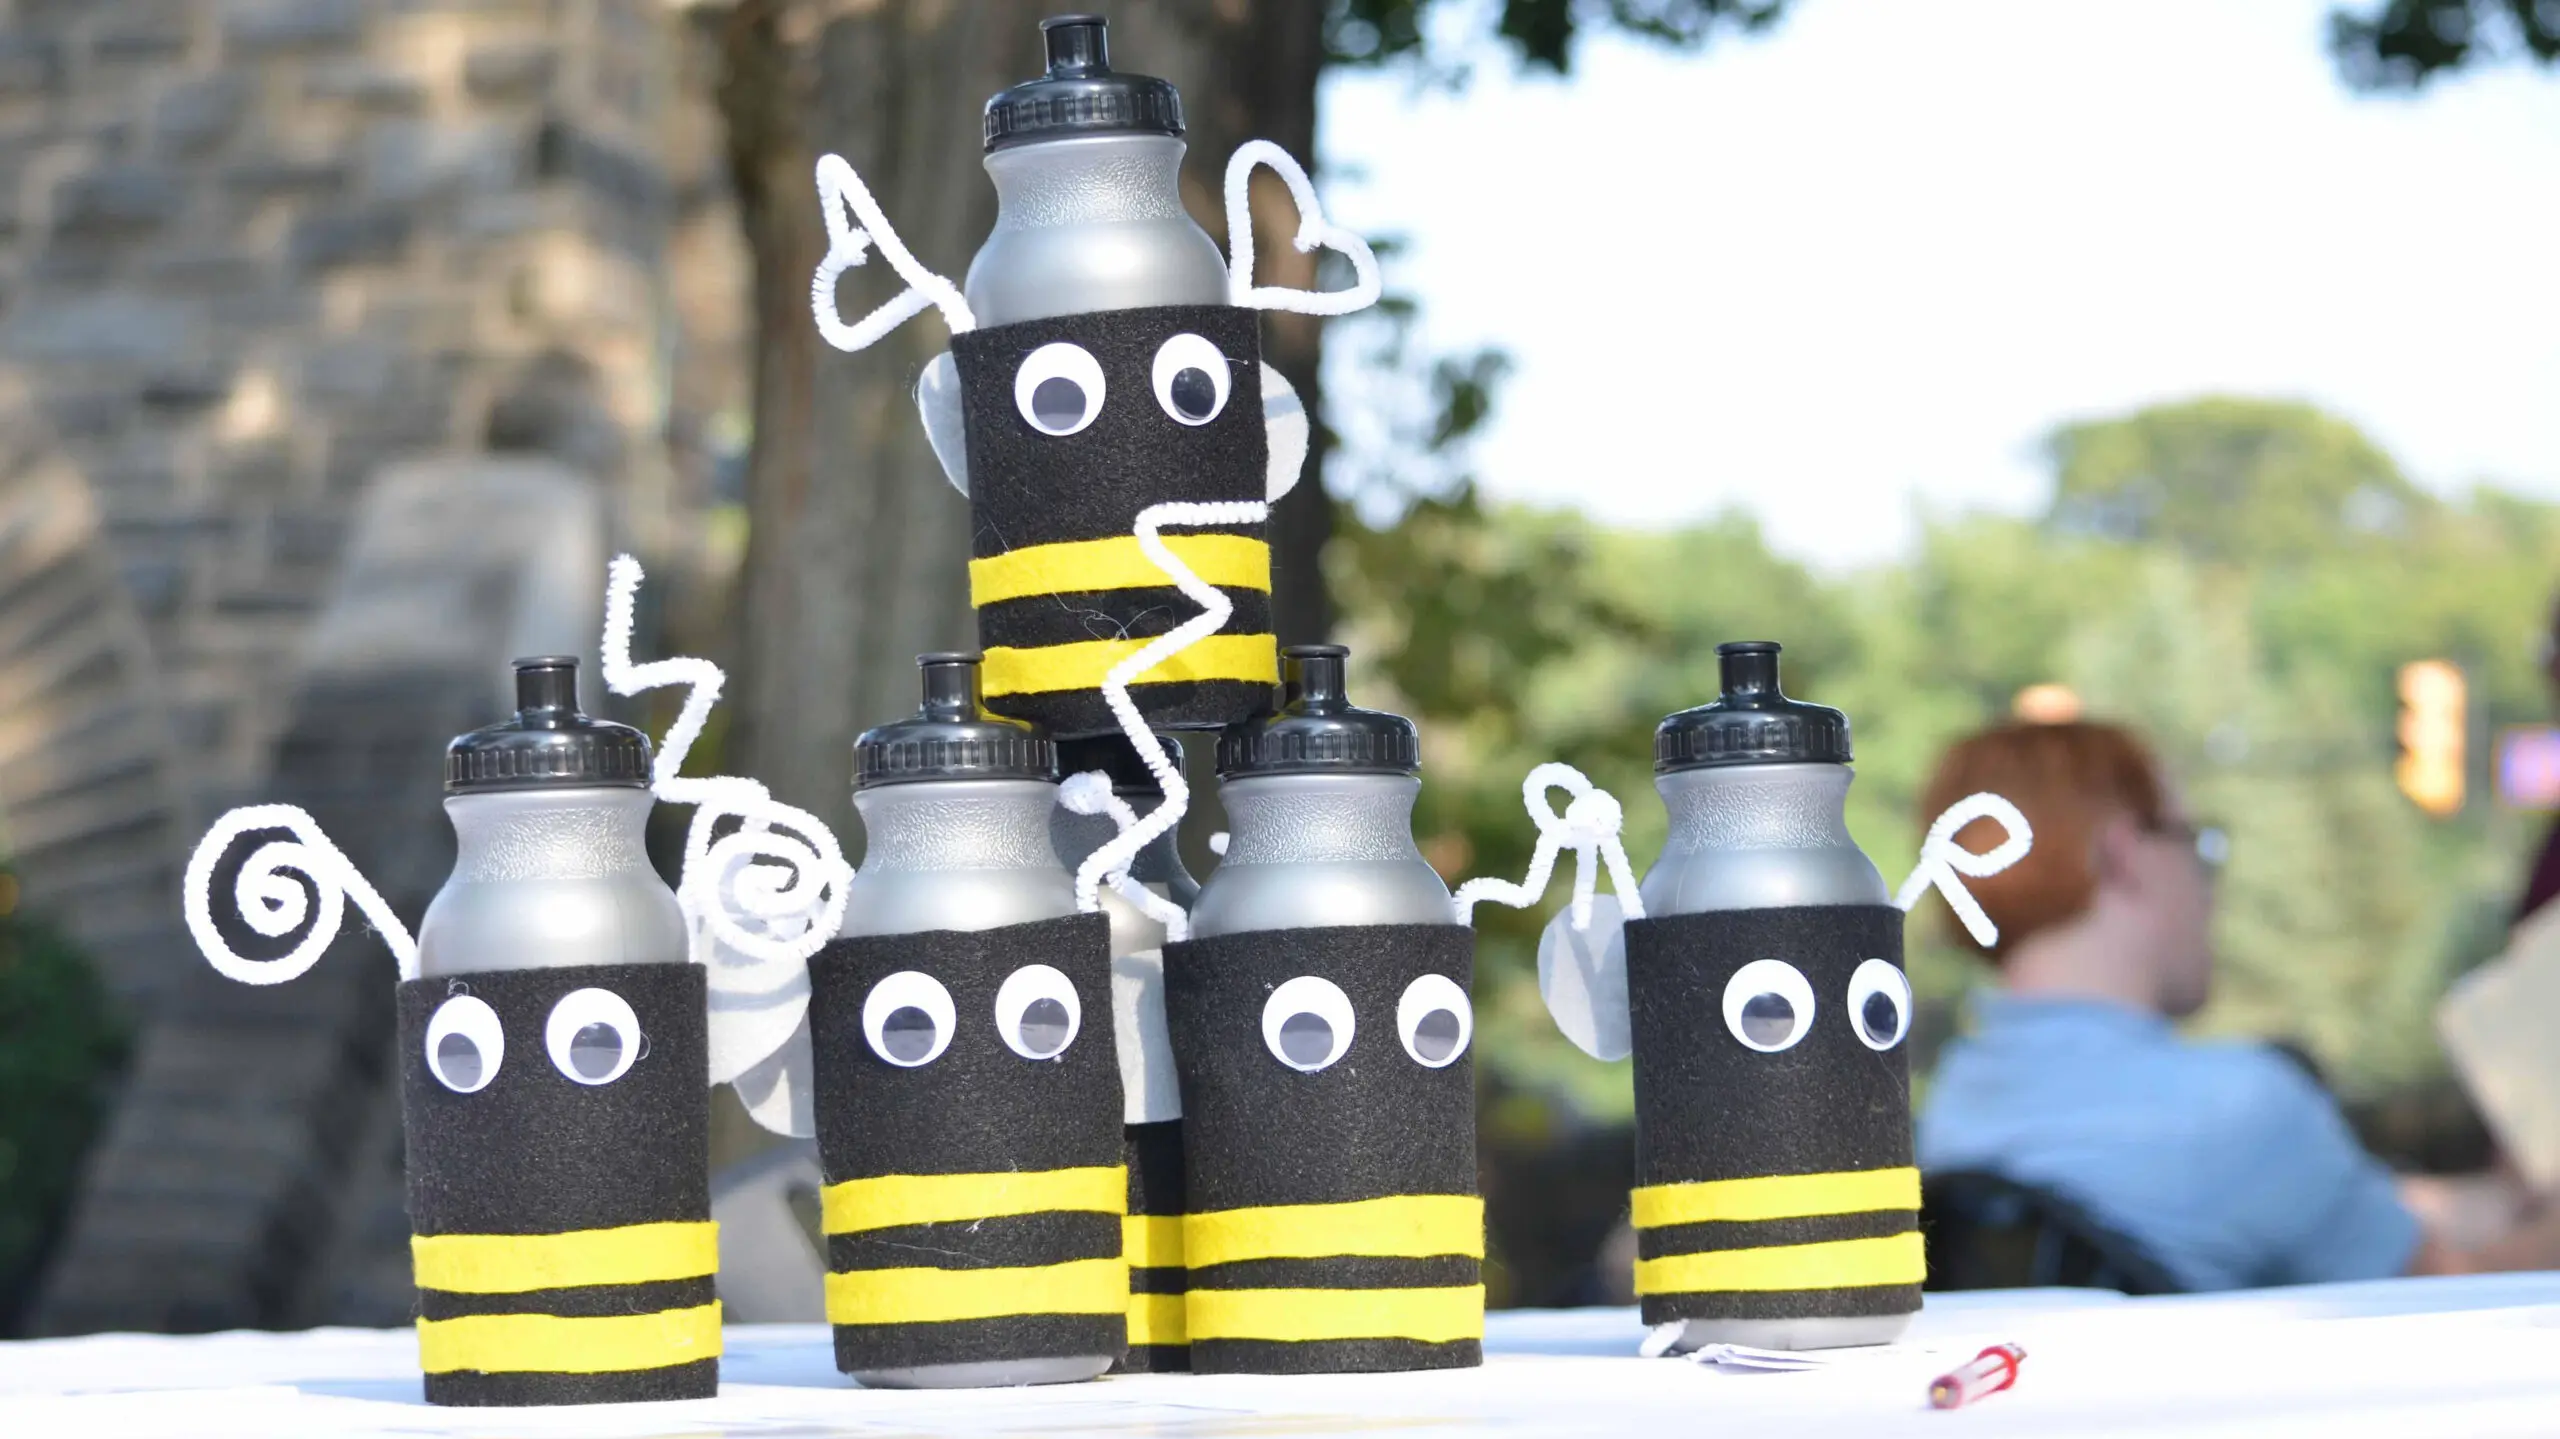 A stack of gray water bottles decorated like bees.